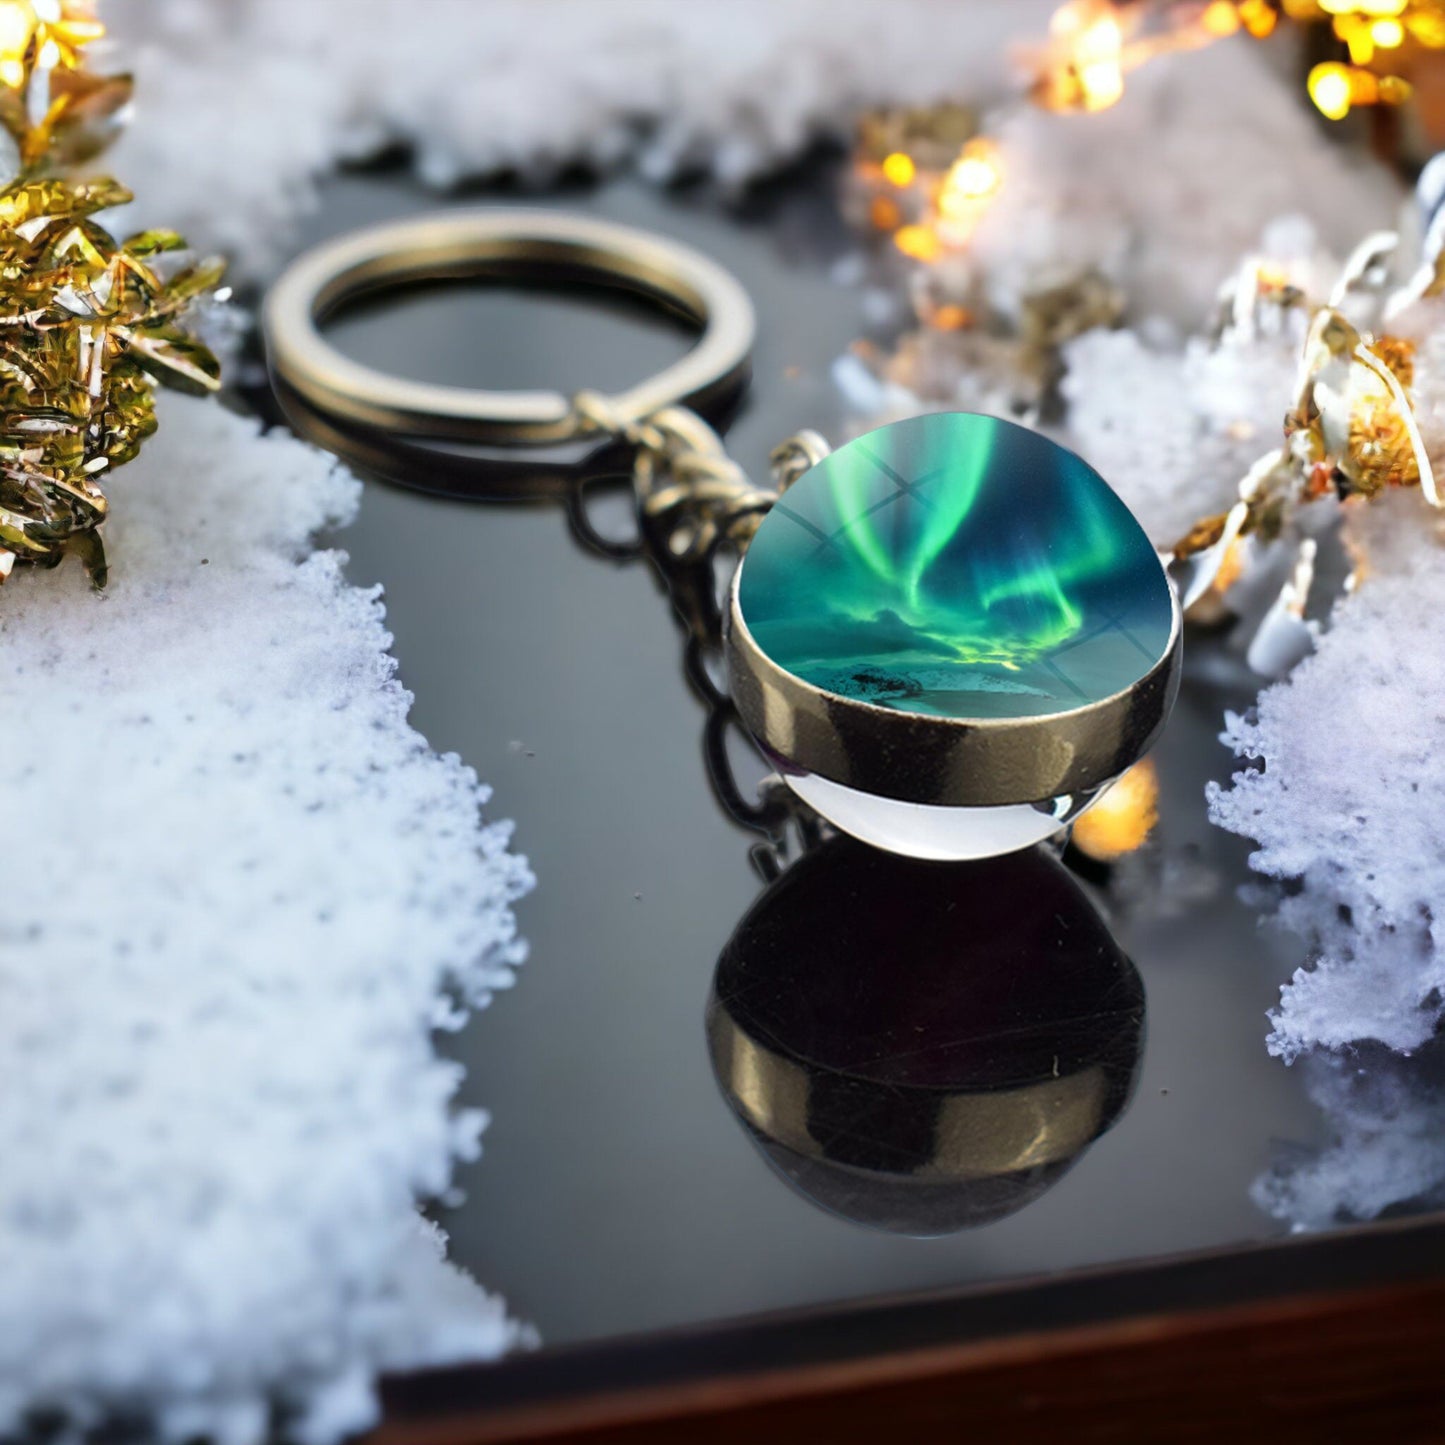 Unique Aurora Borealis Keyring - Northern Light Jewelry - Double Side Glass Ball Key Chain - Perfect Aurora Lovers Gift 20